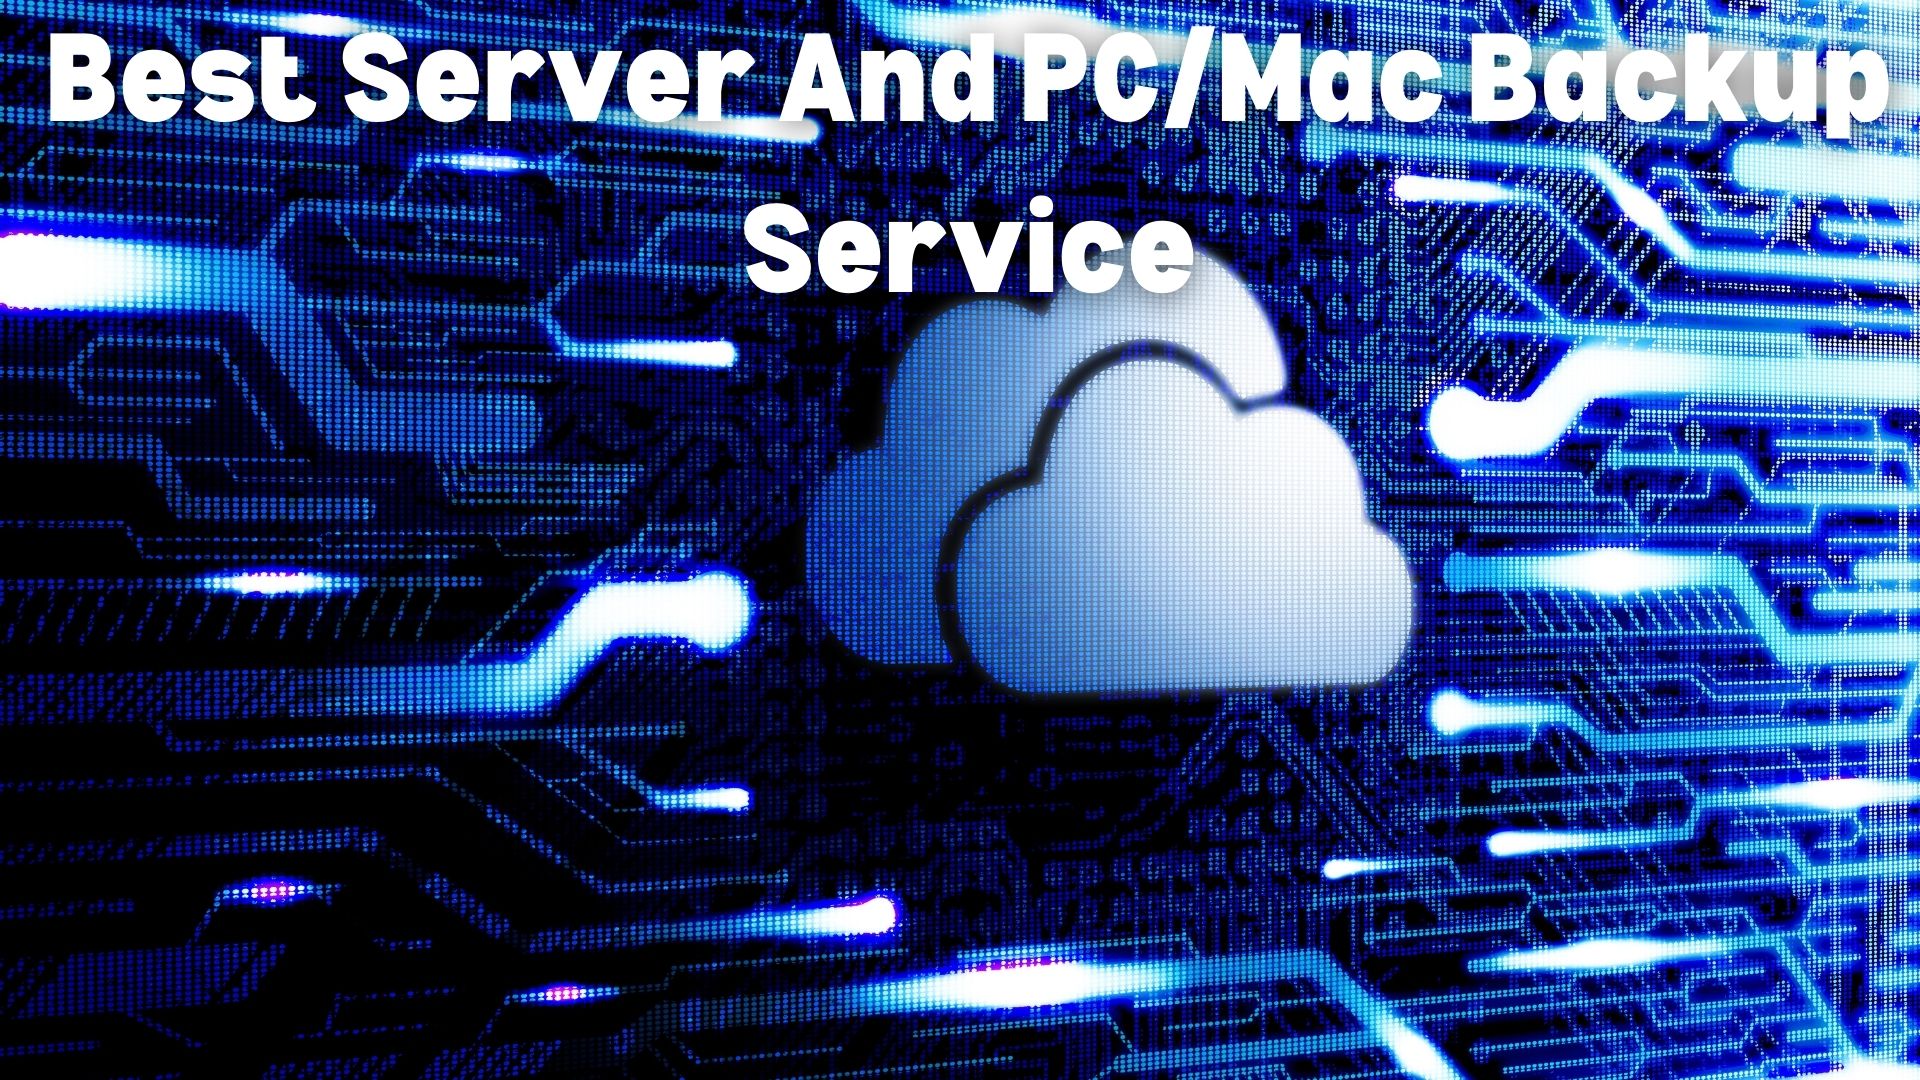 You are currently viewing Best Server And PC/Mac Backup Service In Houston, Texas